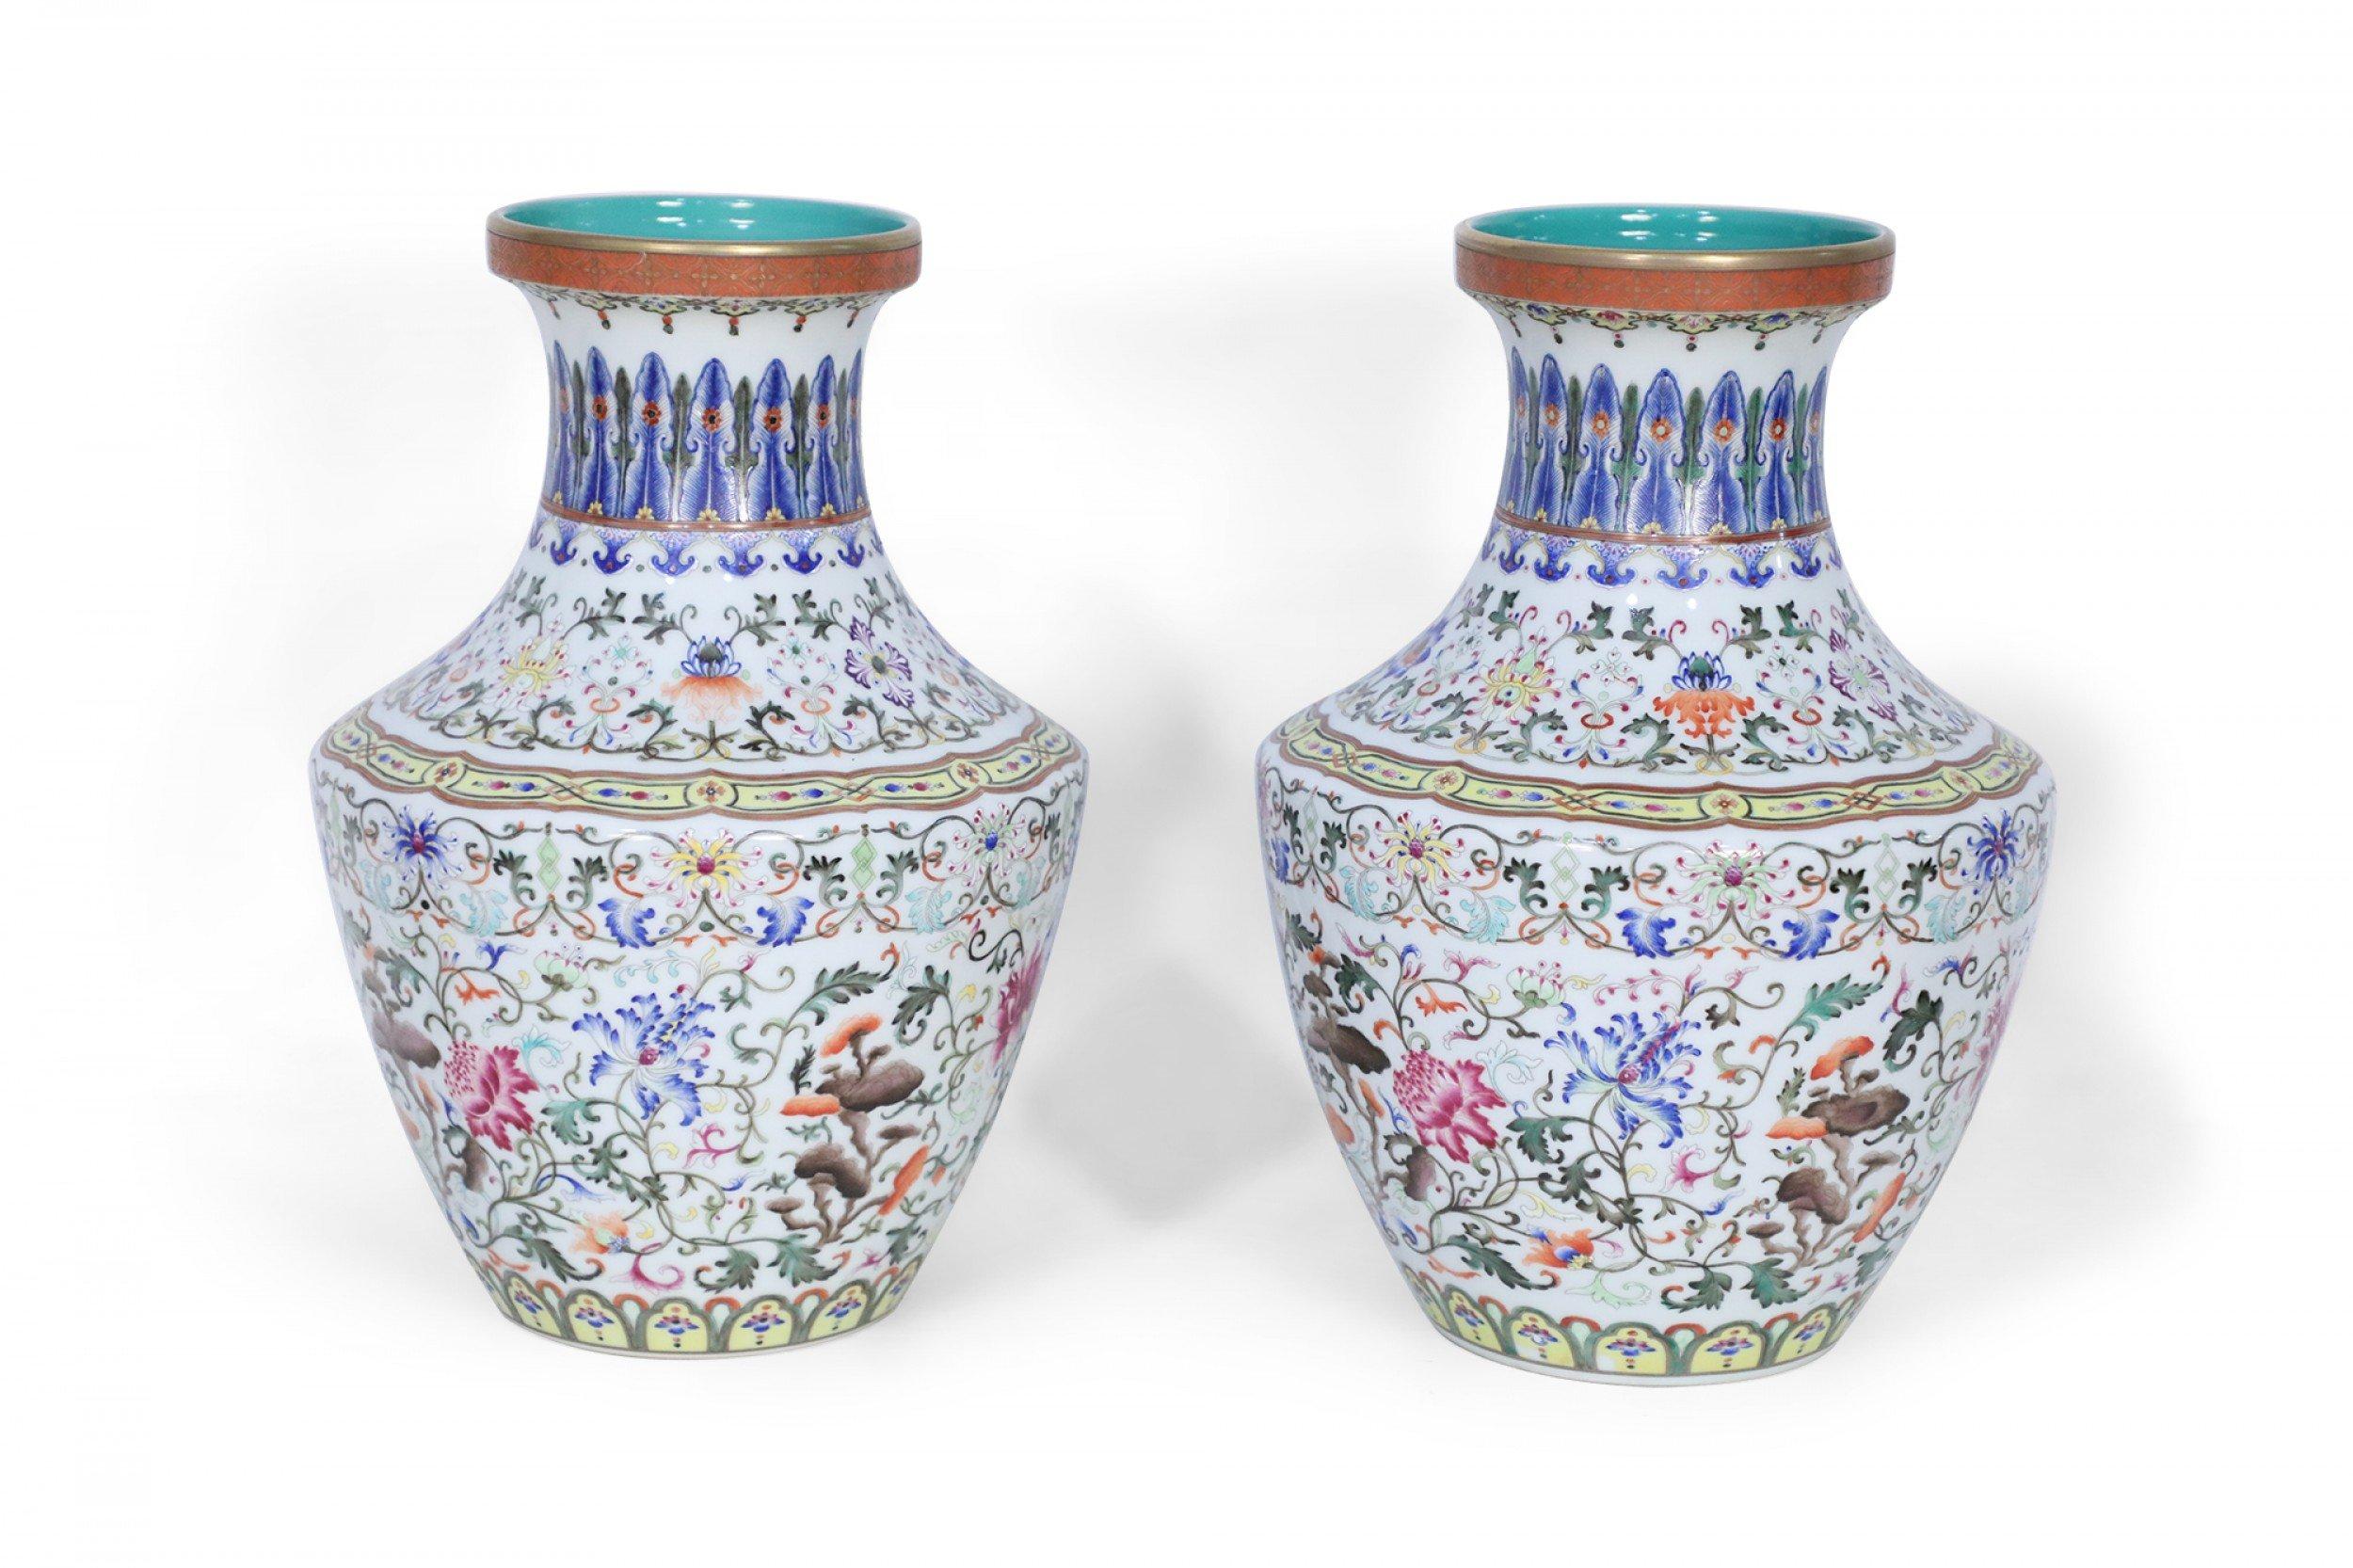 20th Century Pair of Chinese Multi-Color Pattern Porcelain Vases